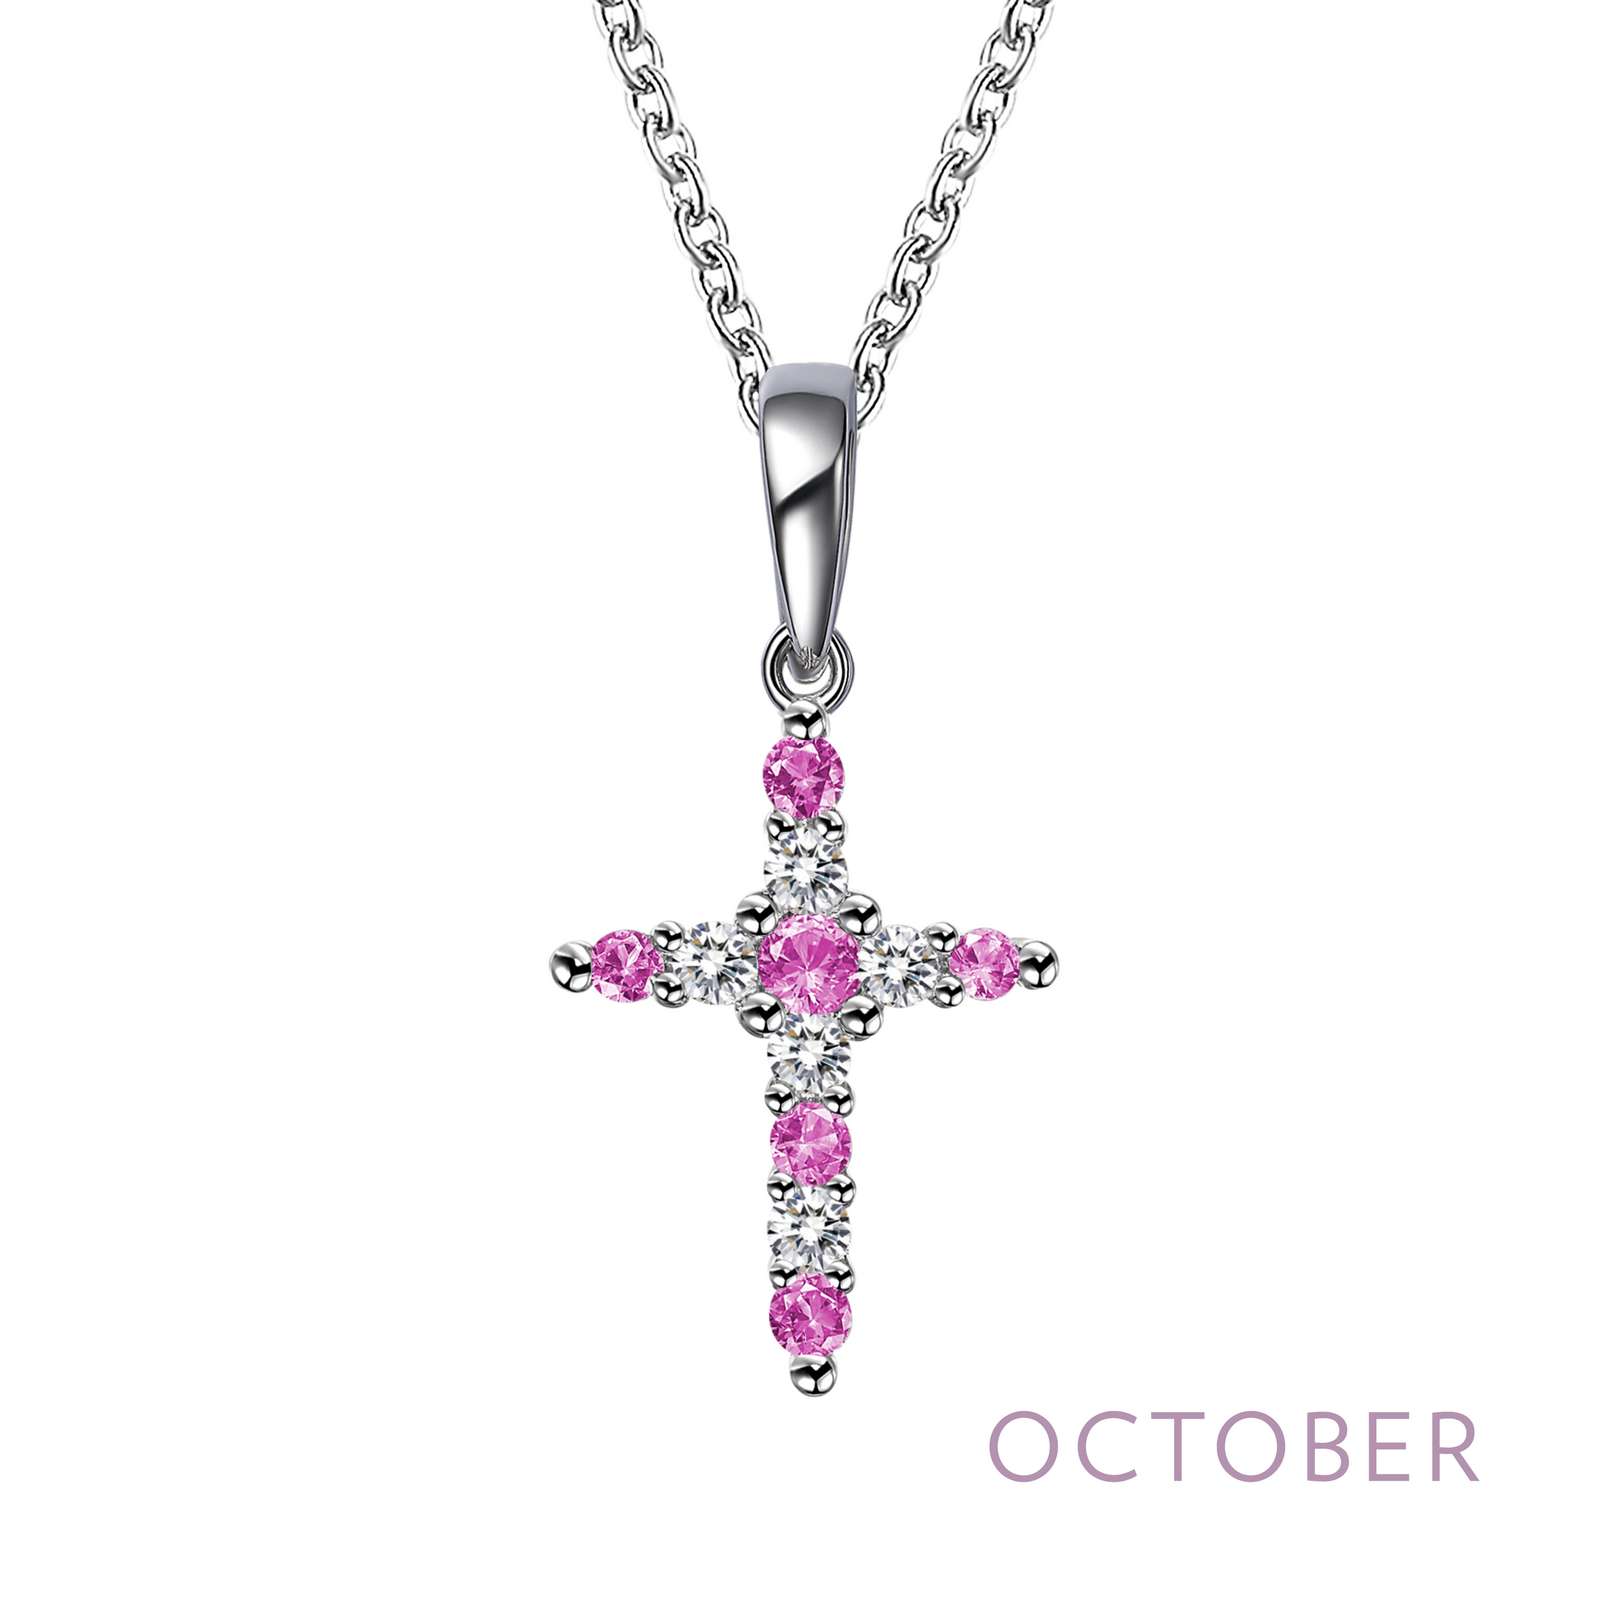 October Birthstone Necklace Griner Jewelry Co. Moultrie, GA